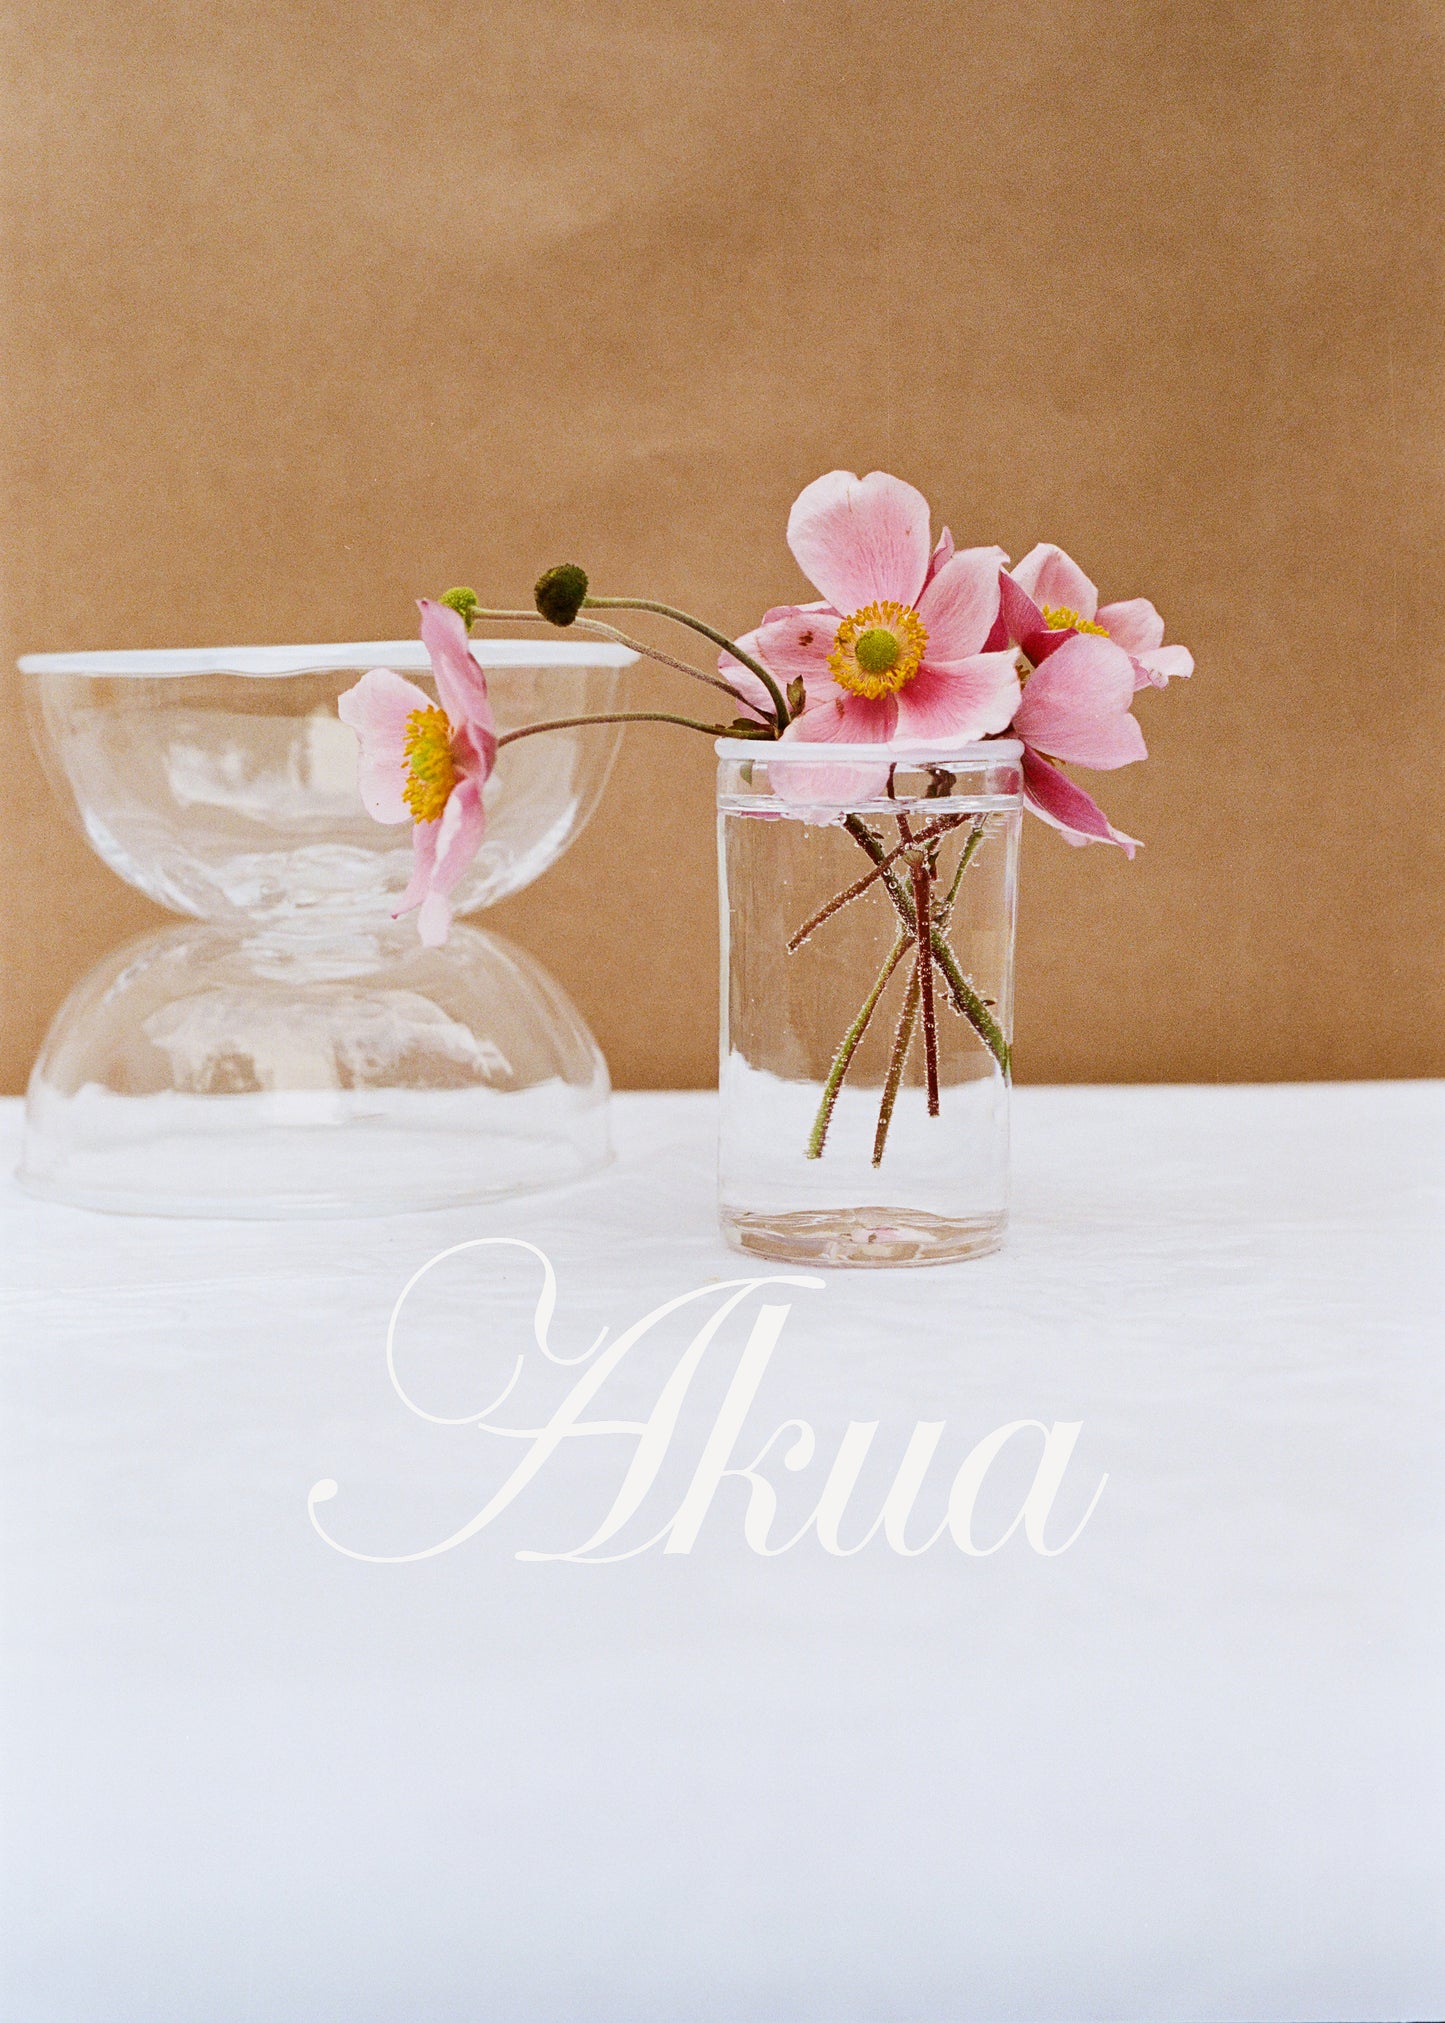 Akua Objects Glassware. Mouth blown and handmade Bohemian Glassware. Made in Bohemia. The Peter collection is a dedication to Annika’s grandfather, who made a great effort of gathering his children and grandchildren around an atmospheric dinner table. Glassware with a rim has always been present in the home of Peter’s and is a timeless classic that will be found in homes for many generations to come.